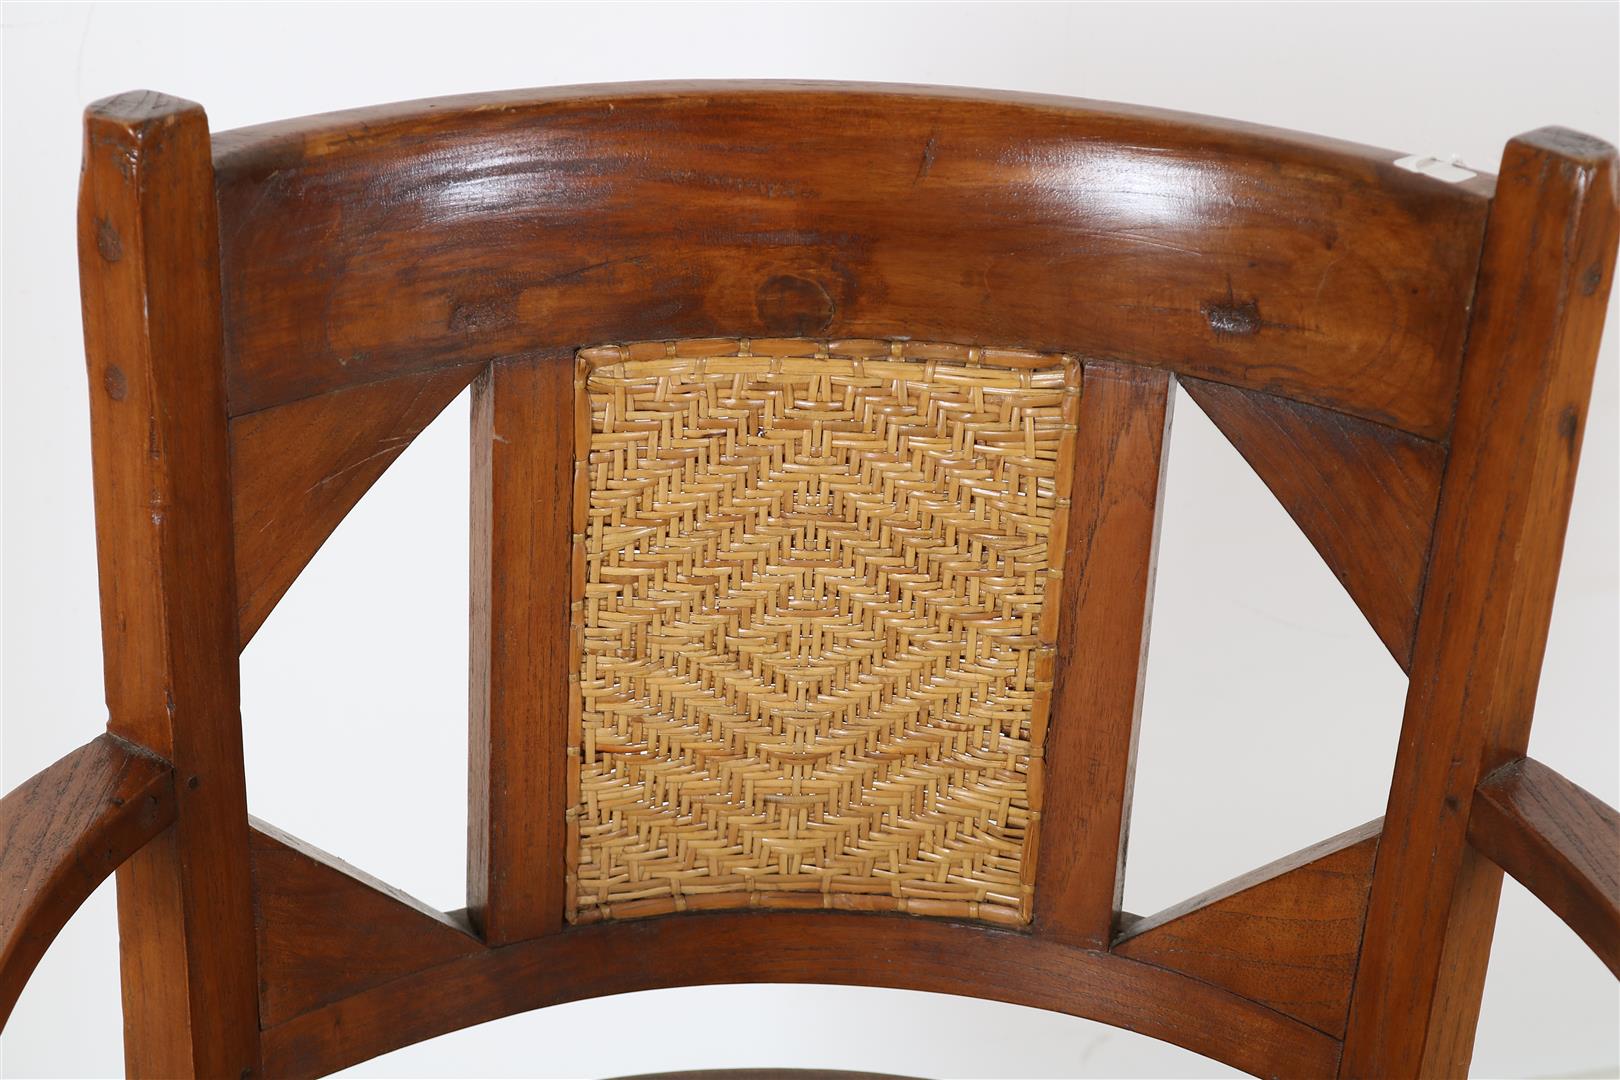 Teak Art Deco office chair with woven wicker seat, Indonesia ca. 1925. - Image 2 of 4